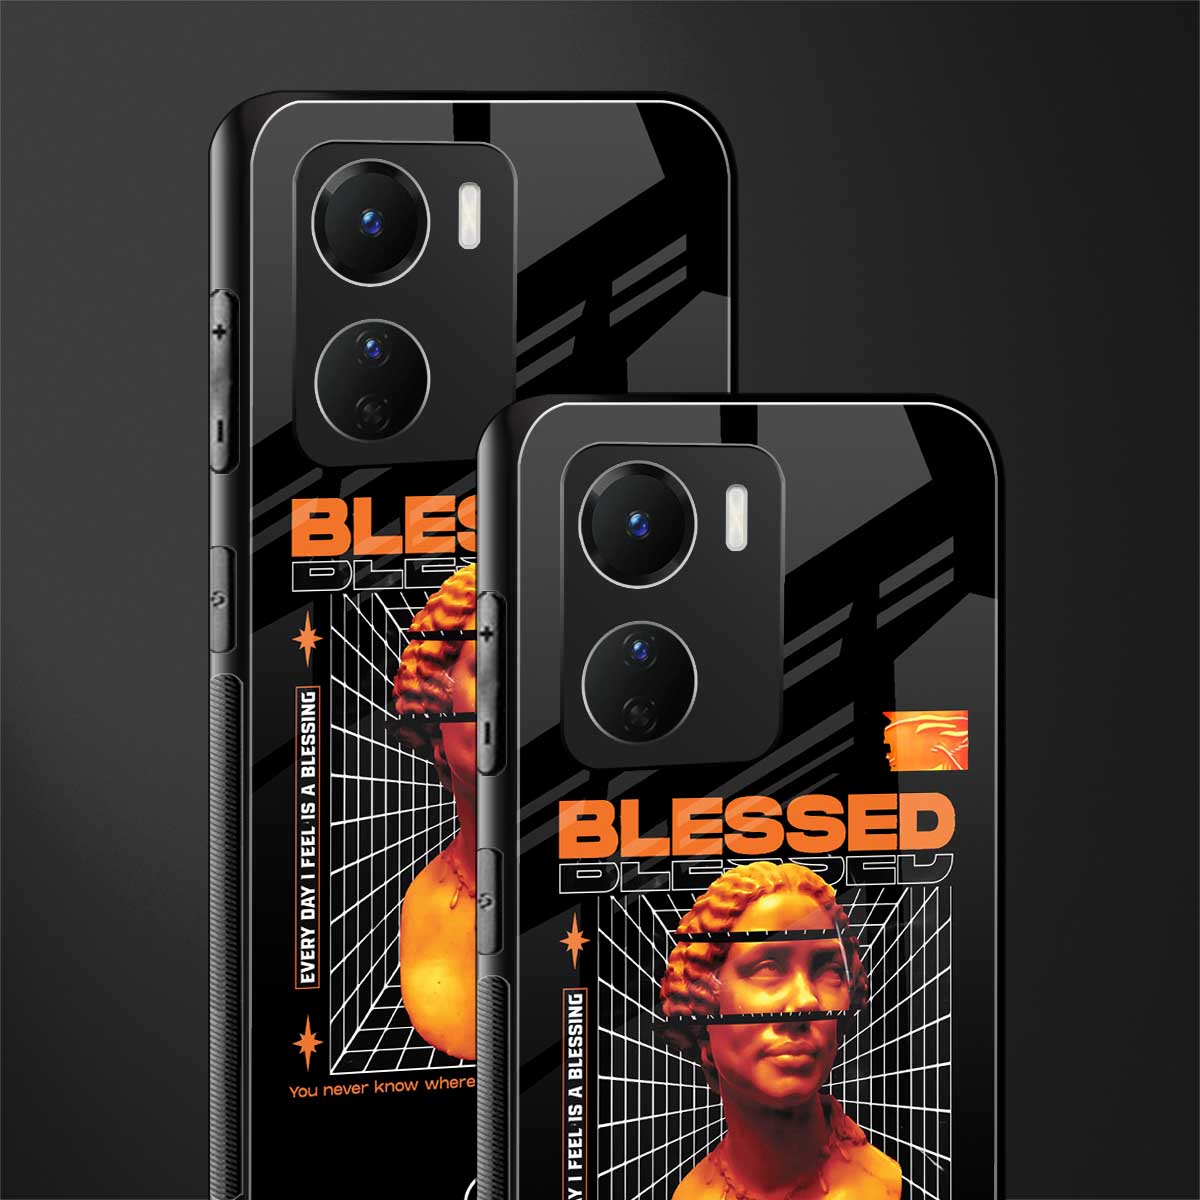 blessing back phone cover | glass case for vivo y16